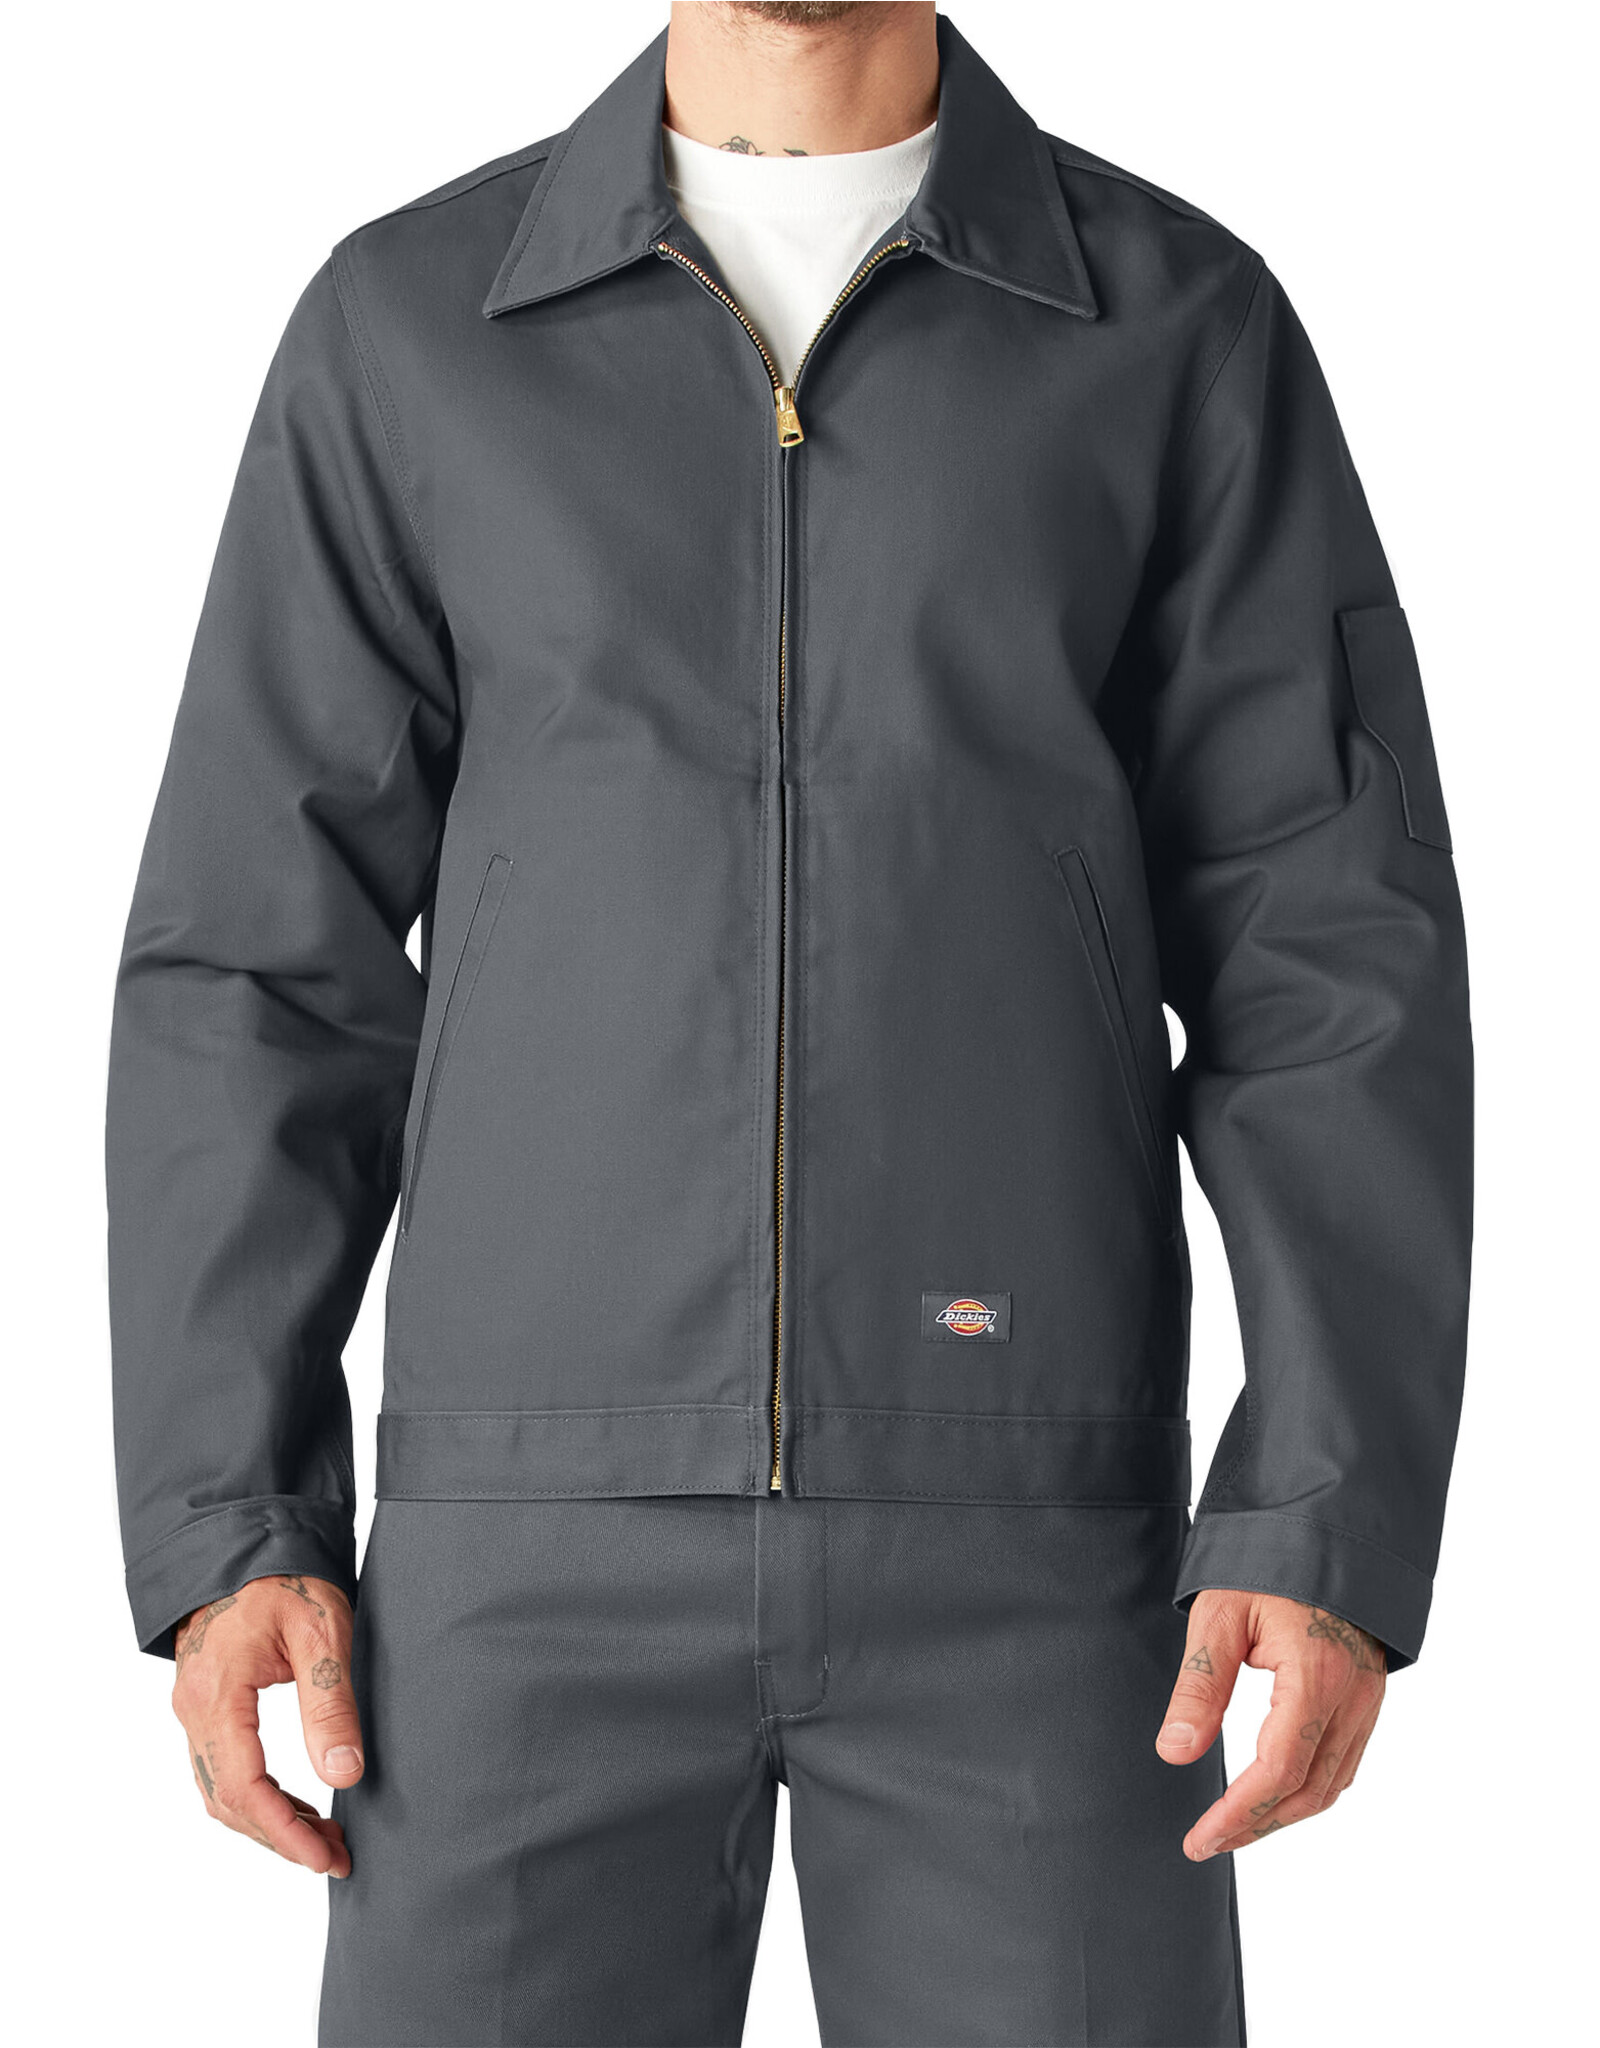 DICKIES Unlined Eisenhower Jacket Charcoal - JT75CH